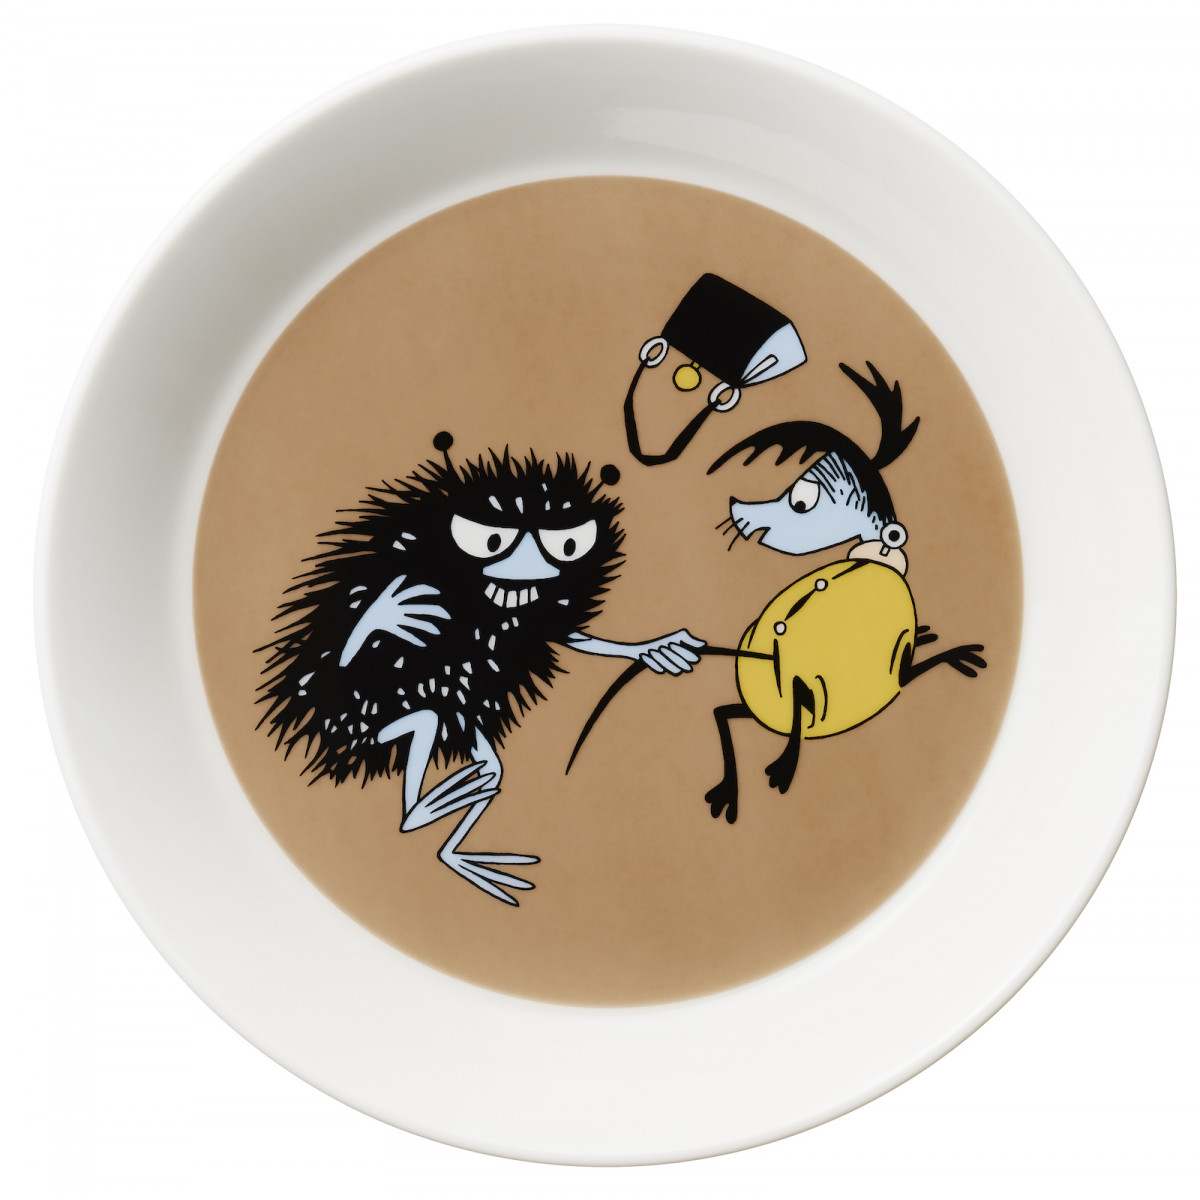 Stinky in action - Moomin plate